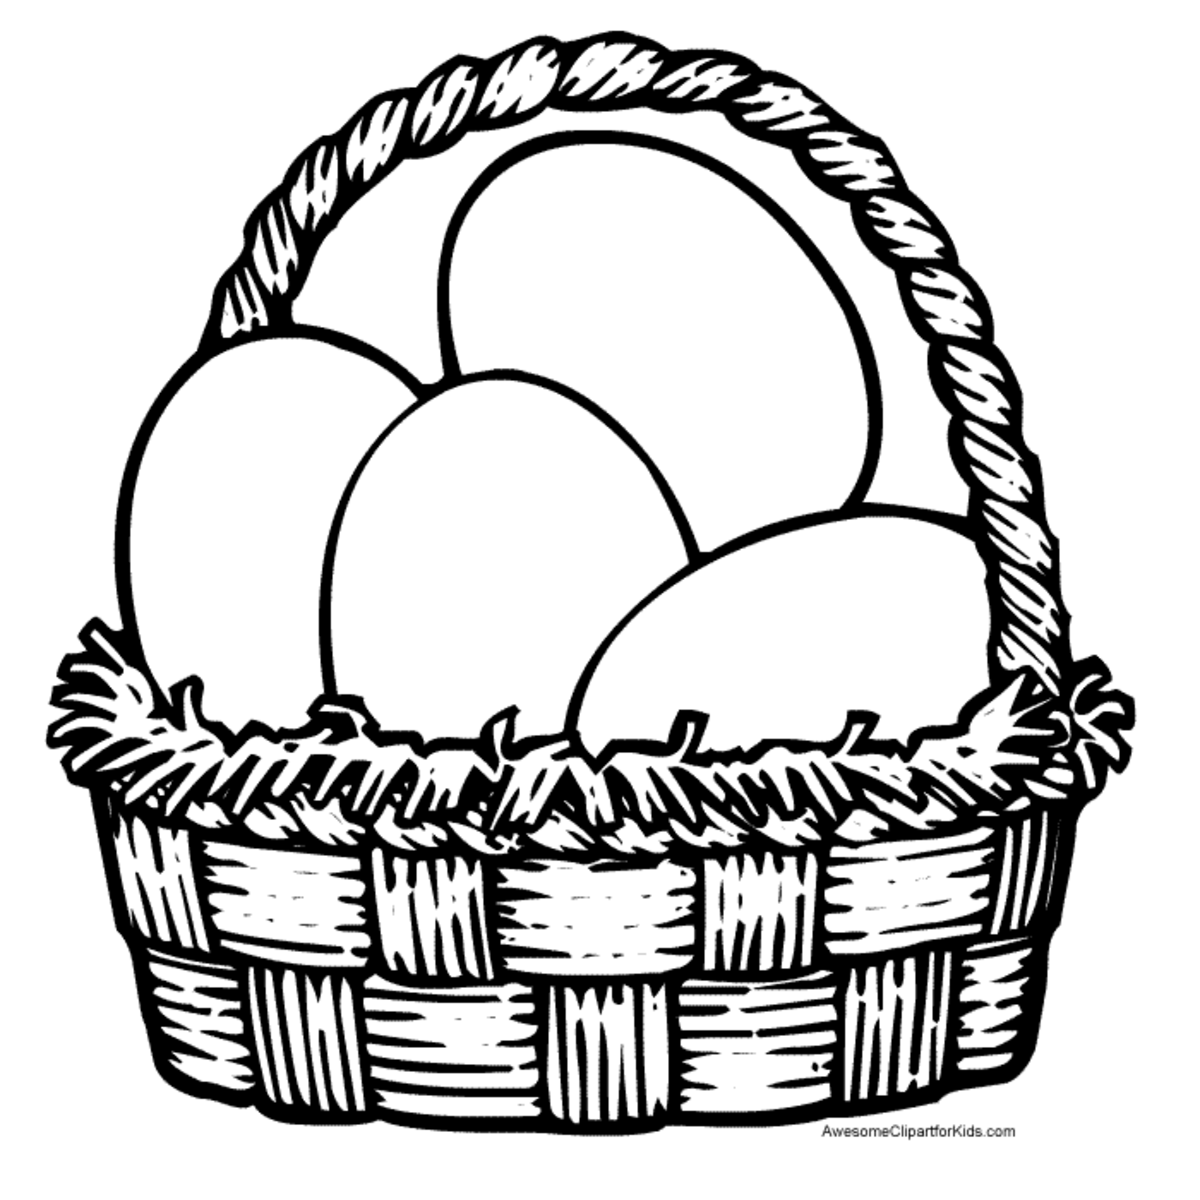 A classic straw and egg basket